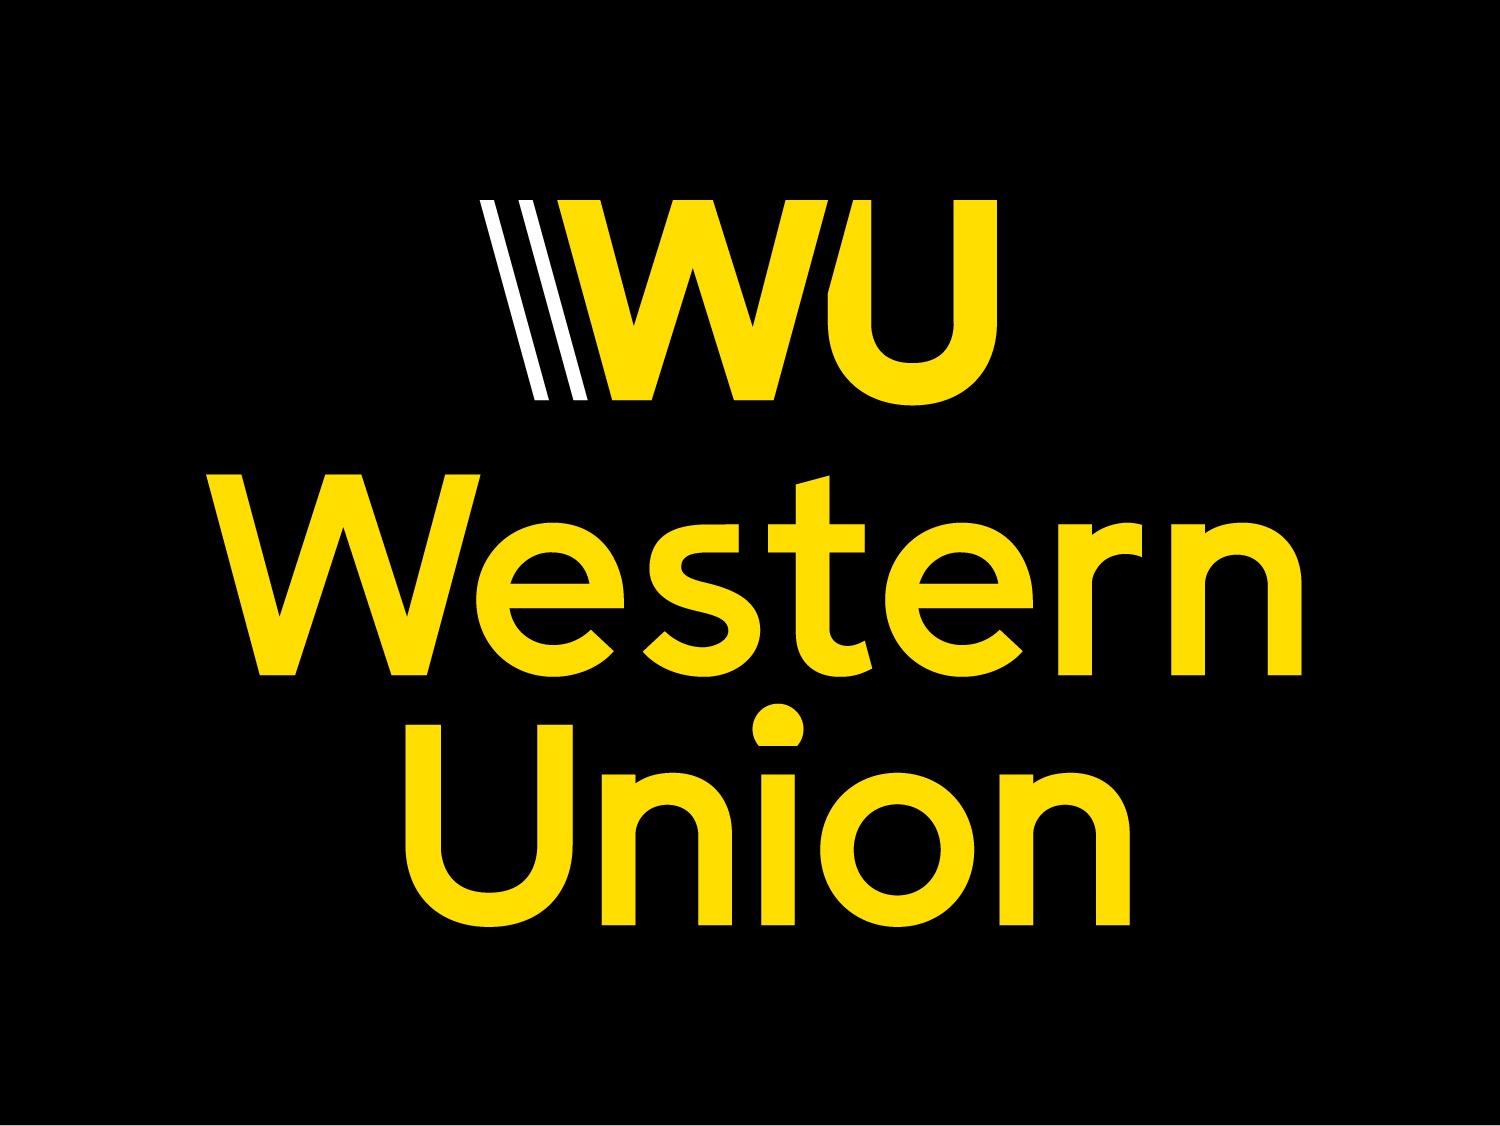 How Much Does It Cost To Send Money Western Union? Cost To Send Money In A Box